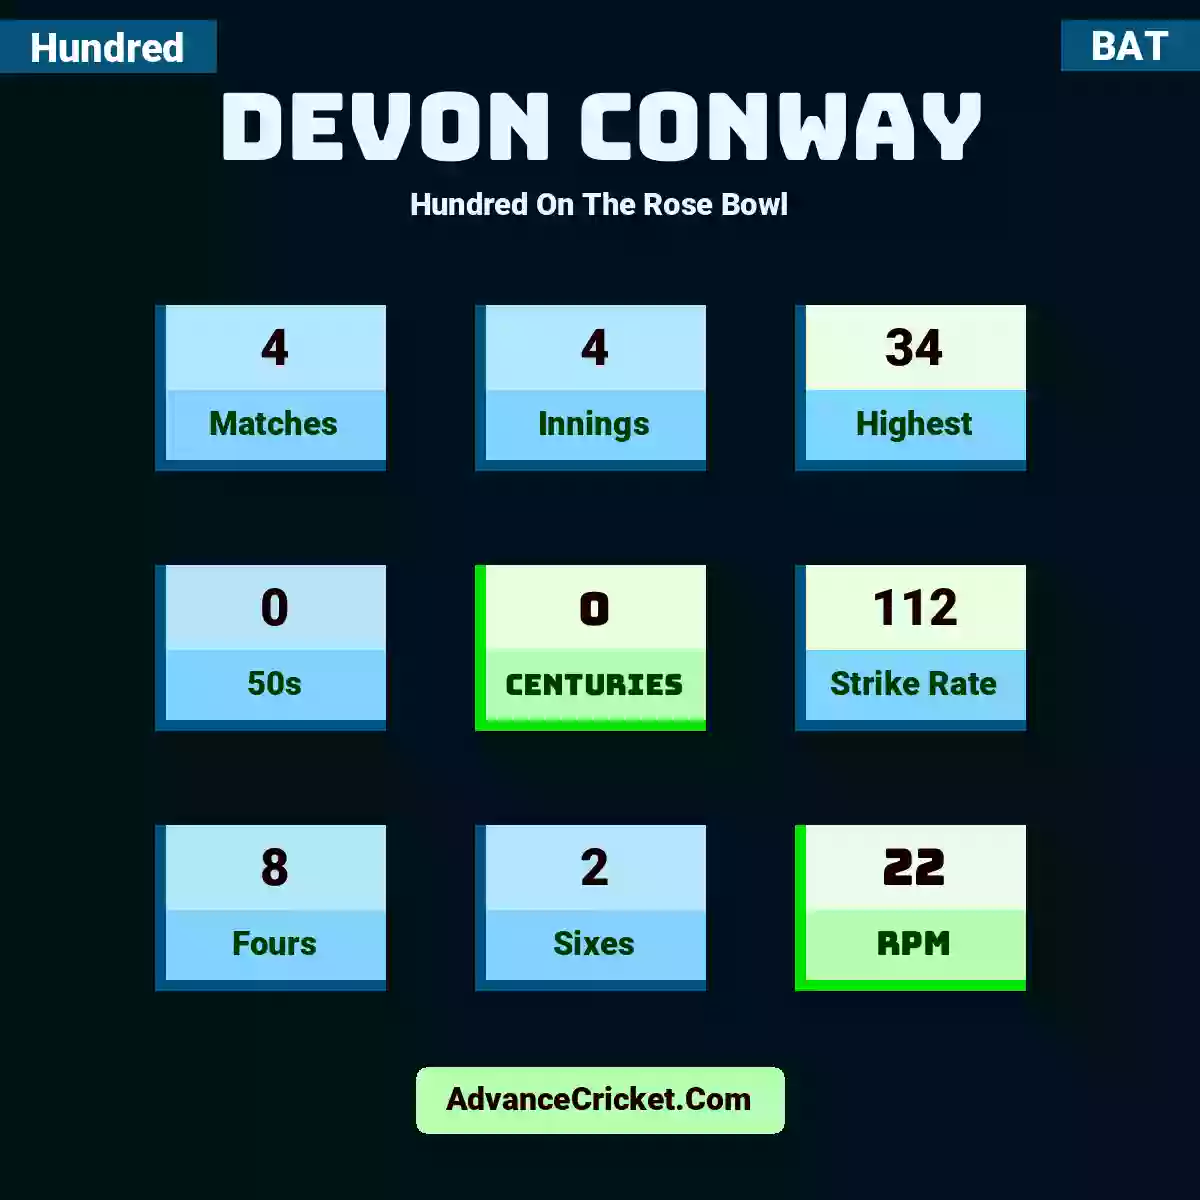 Devon Conway Hundred  On The Rose Bowl, Devon Conway played 4 matches, scored 34 runs as highest, 0 half-centuries, and 0 centuries, with a strike rate of 112. D.Conway hit 8 fours and 2 sixes, with an RPM of 22.